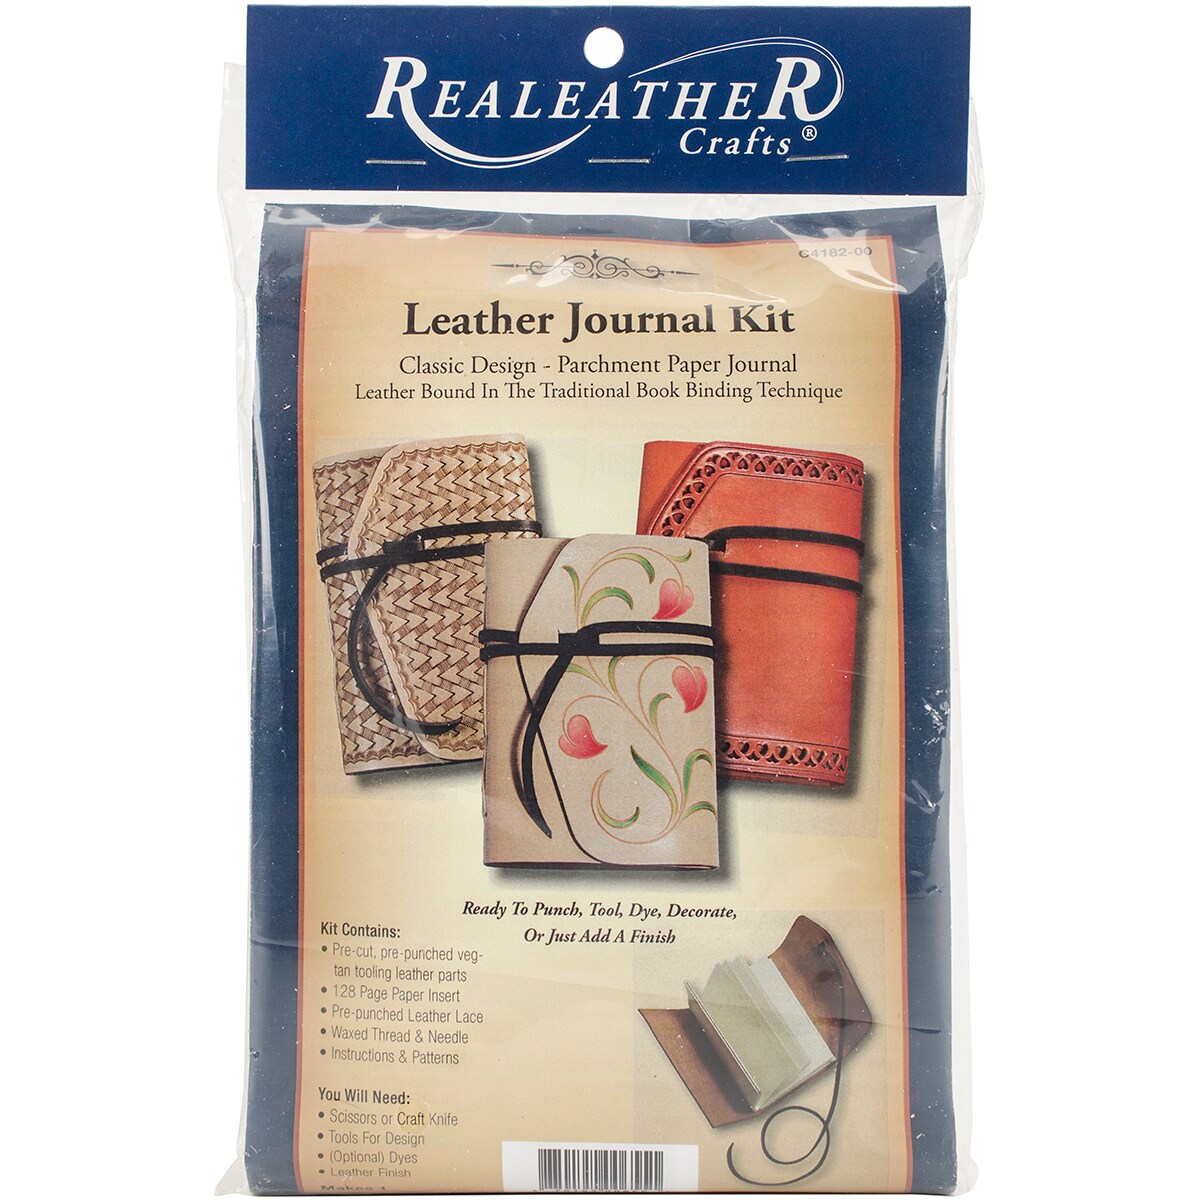 Realeather(R) Crafts Leather Journal Kit-Natural